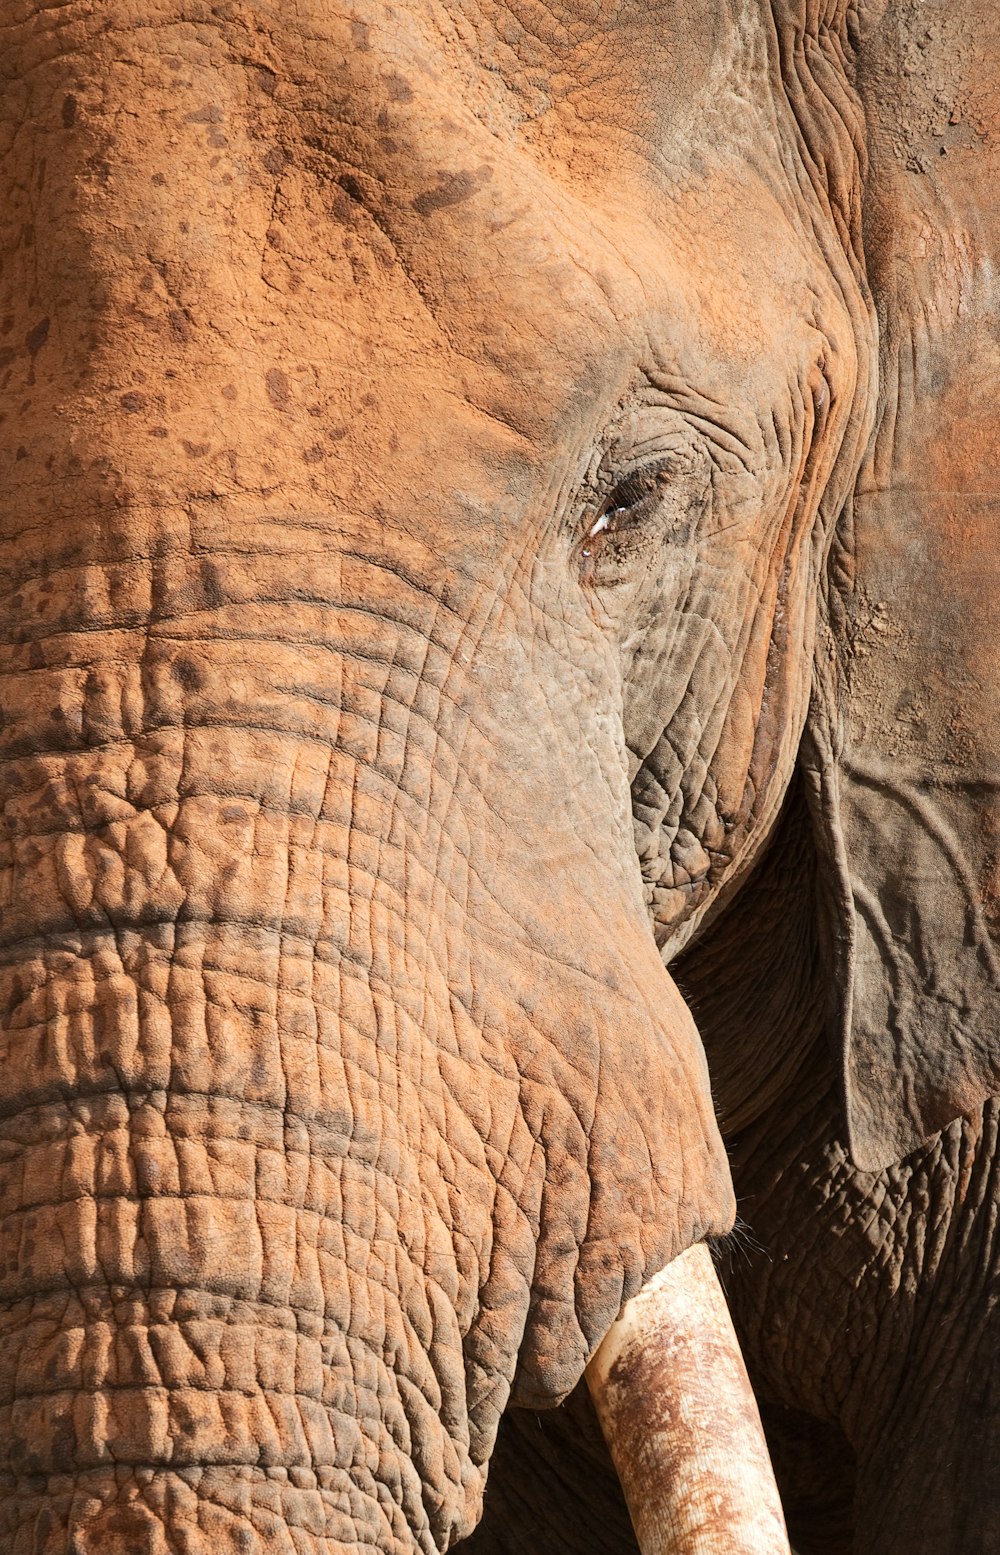 close-up photo of brown elephant